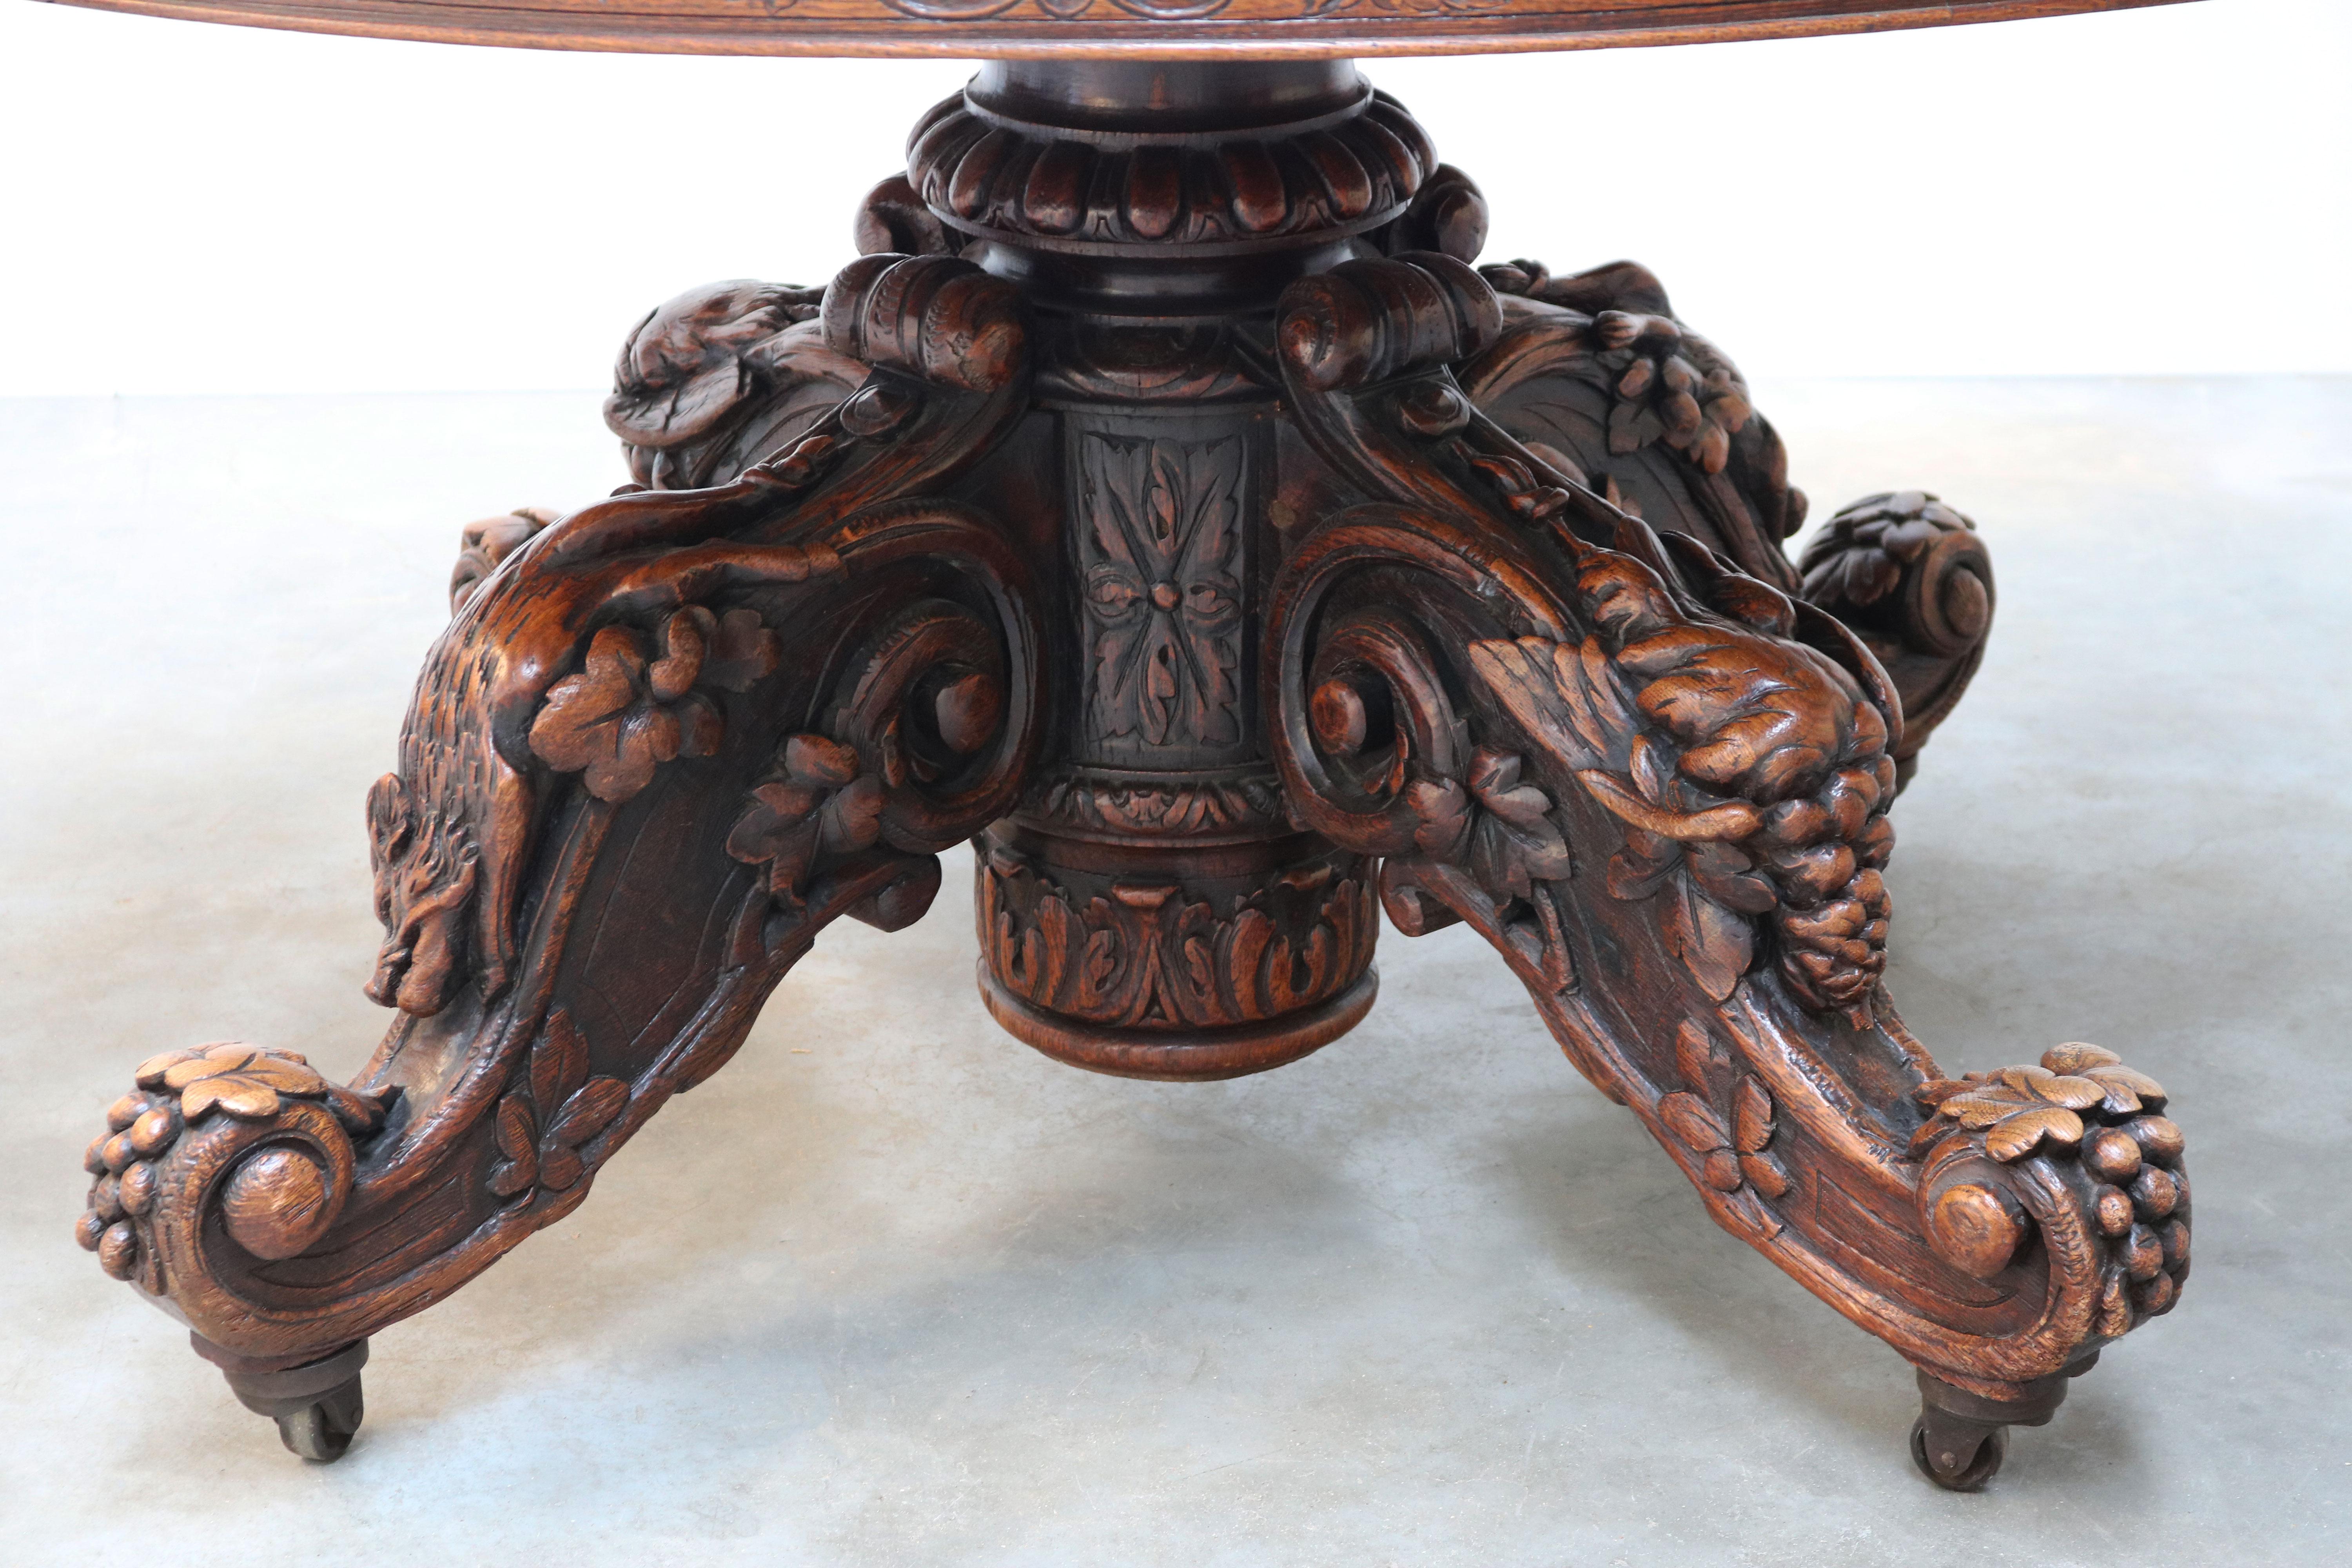 Exquisite 19th century French antique hunting table / beast table in black forest style, large oval model. 
Amazing Trophy model with 4 different hunting trophies displayed on the tables legs. 
Made from European oak with superb craftsmanship, the